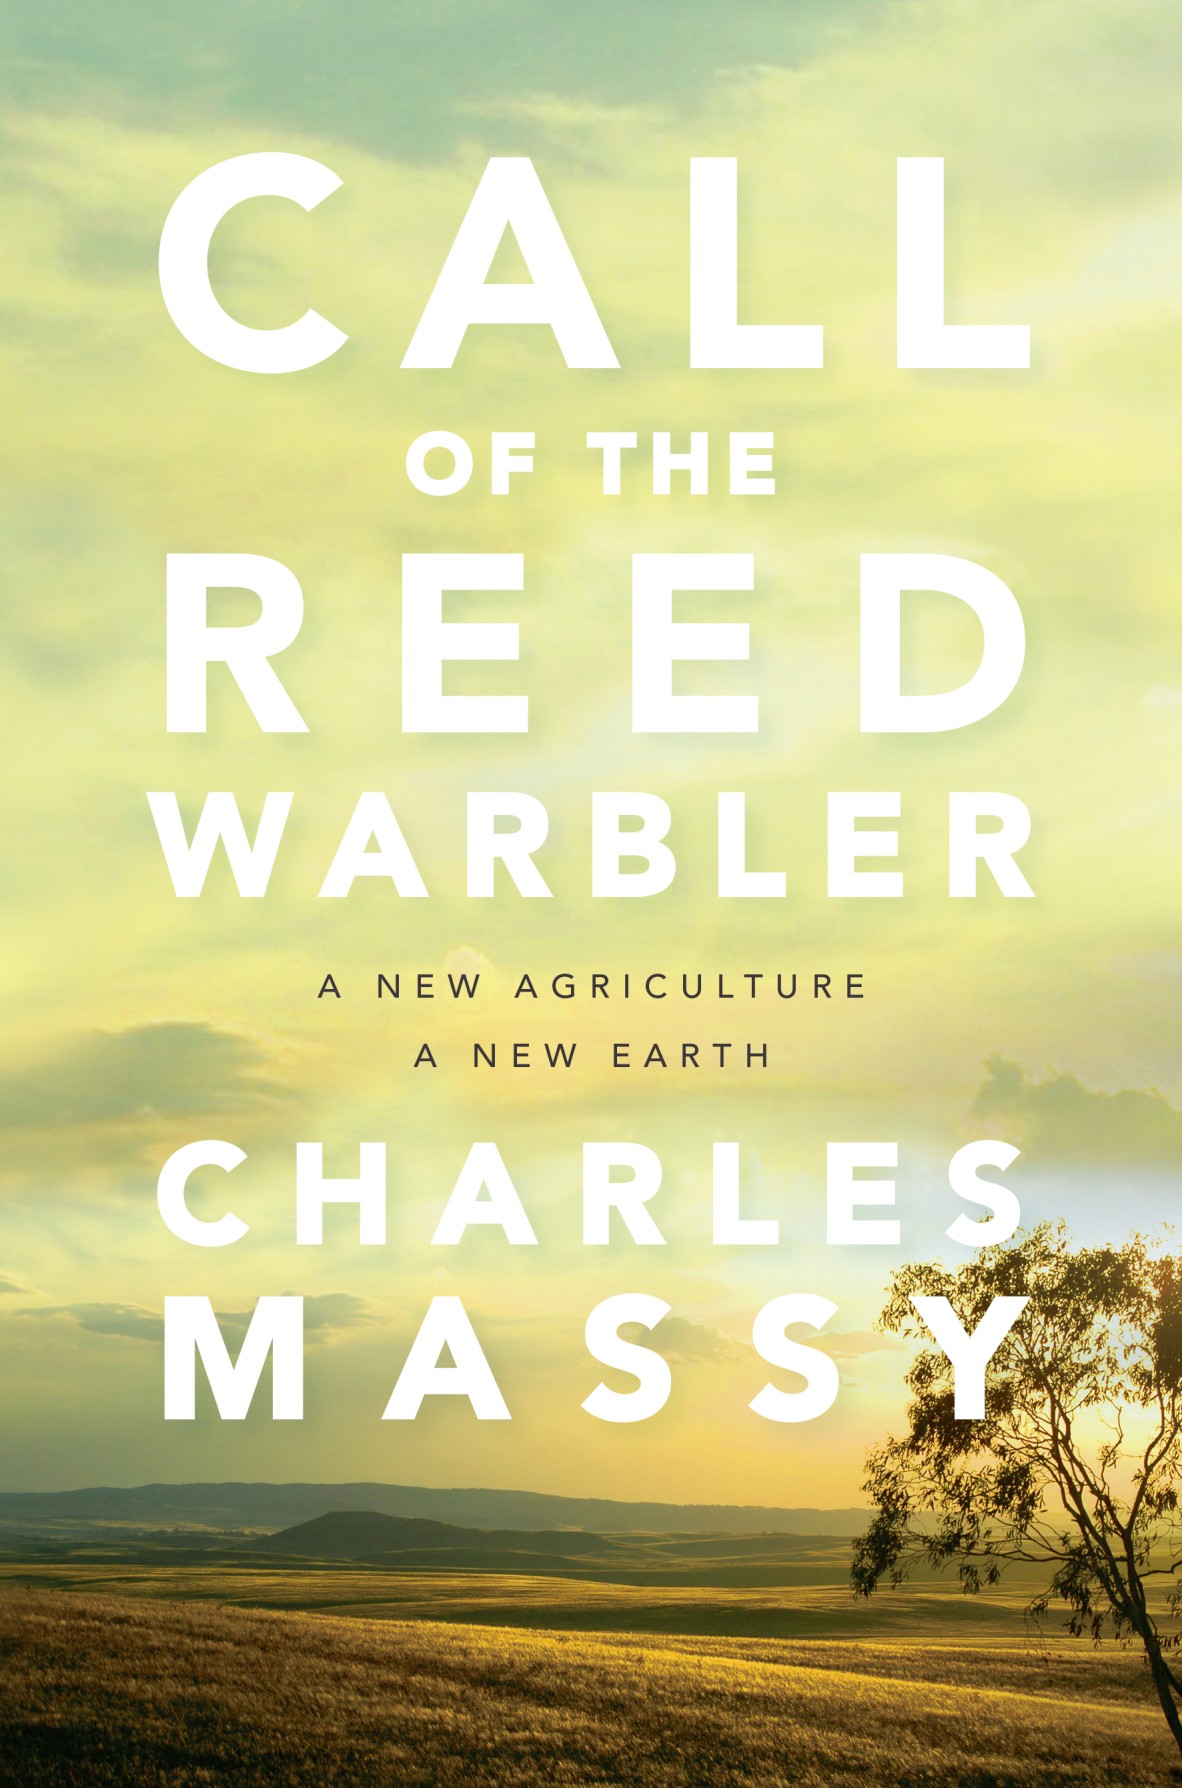 Call of the Reed Warbler by Charles Massy